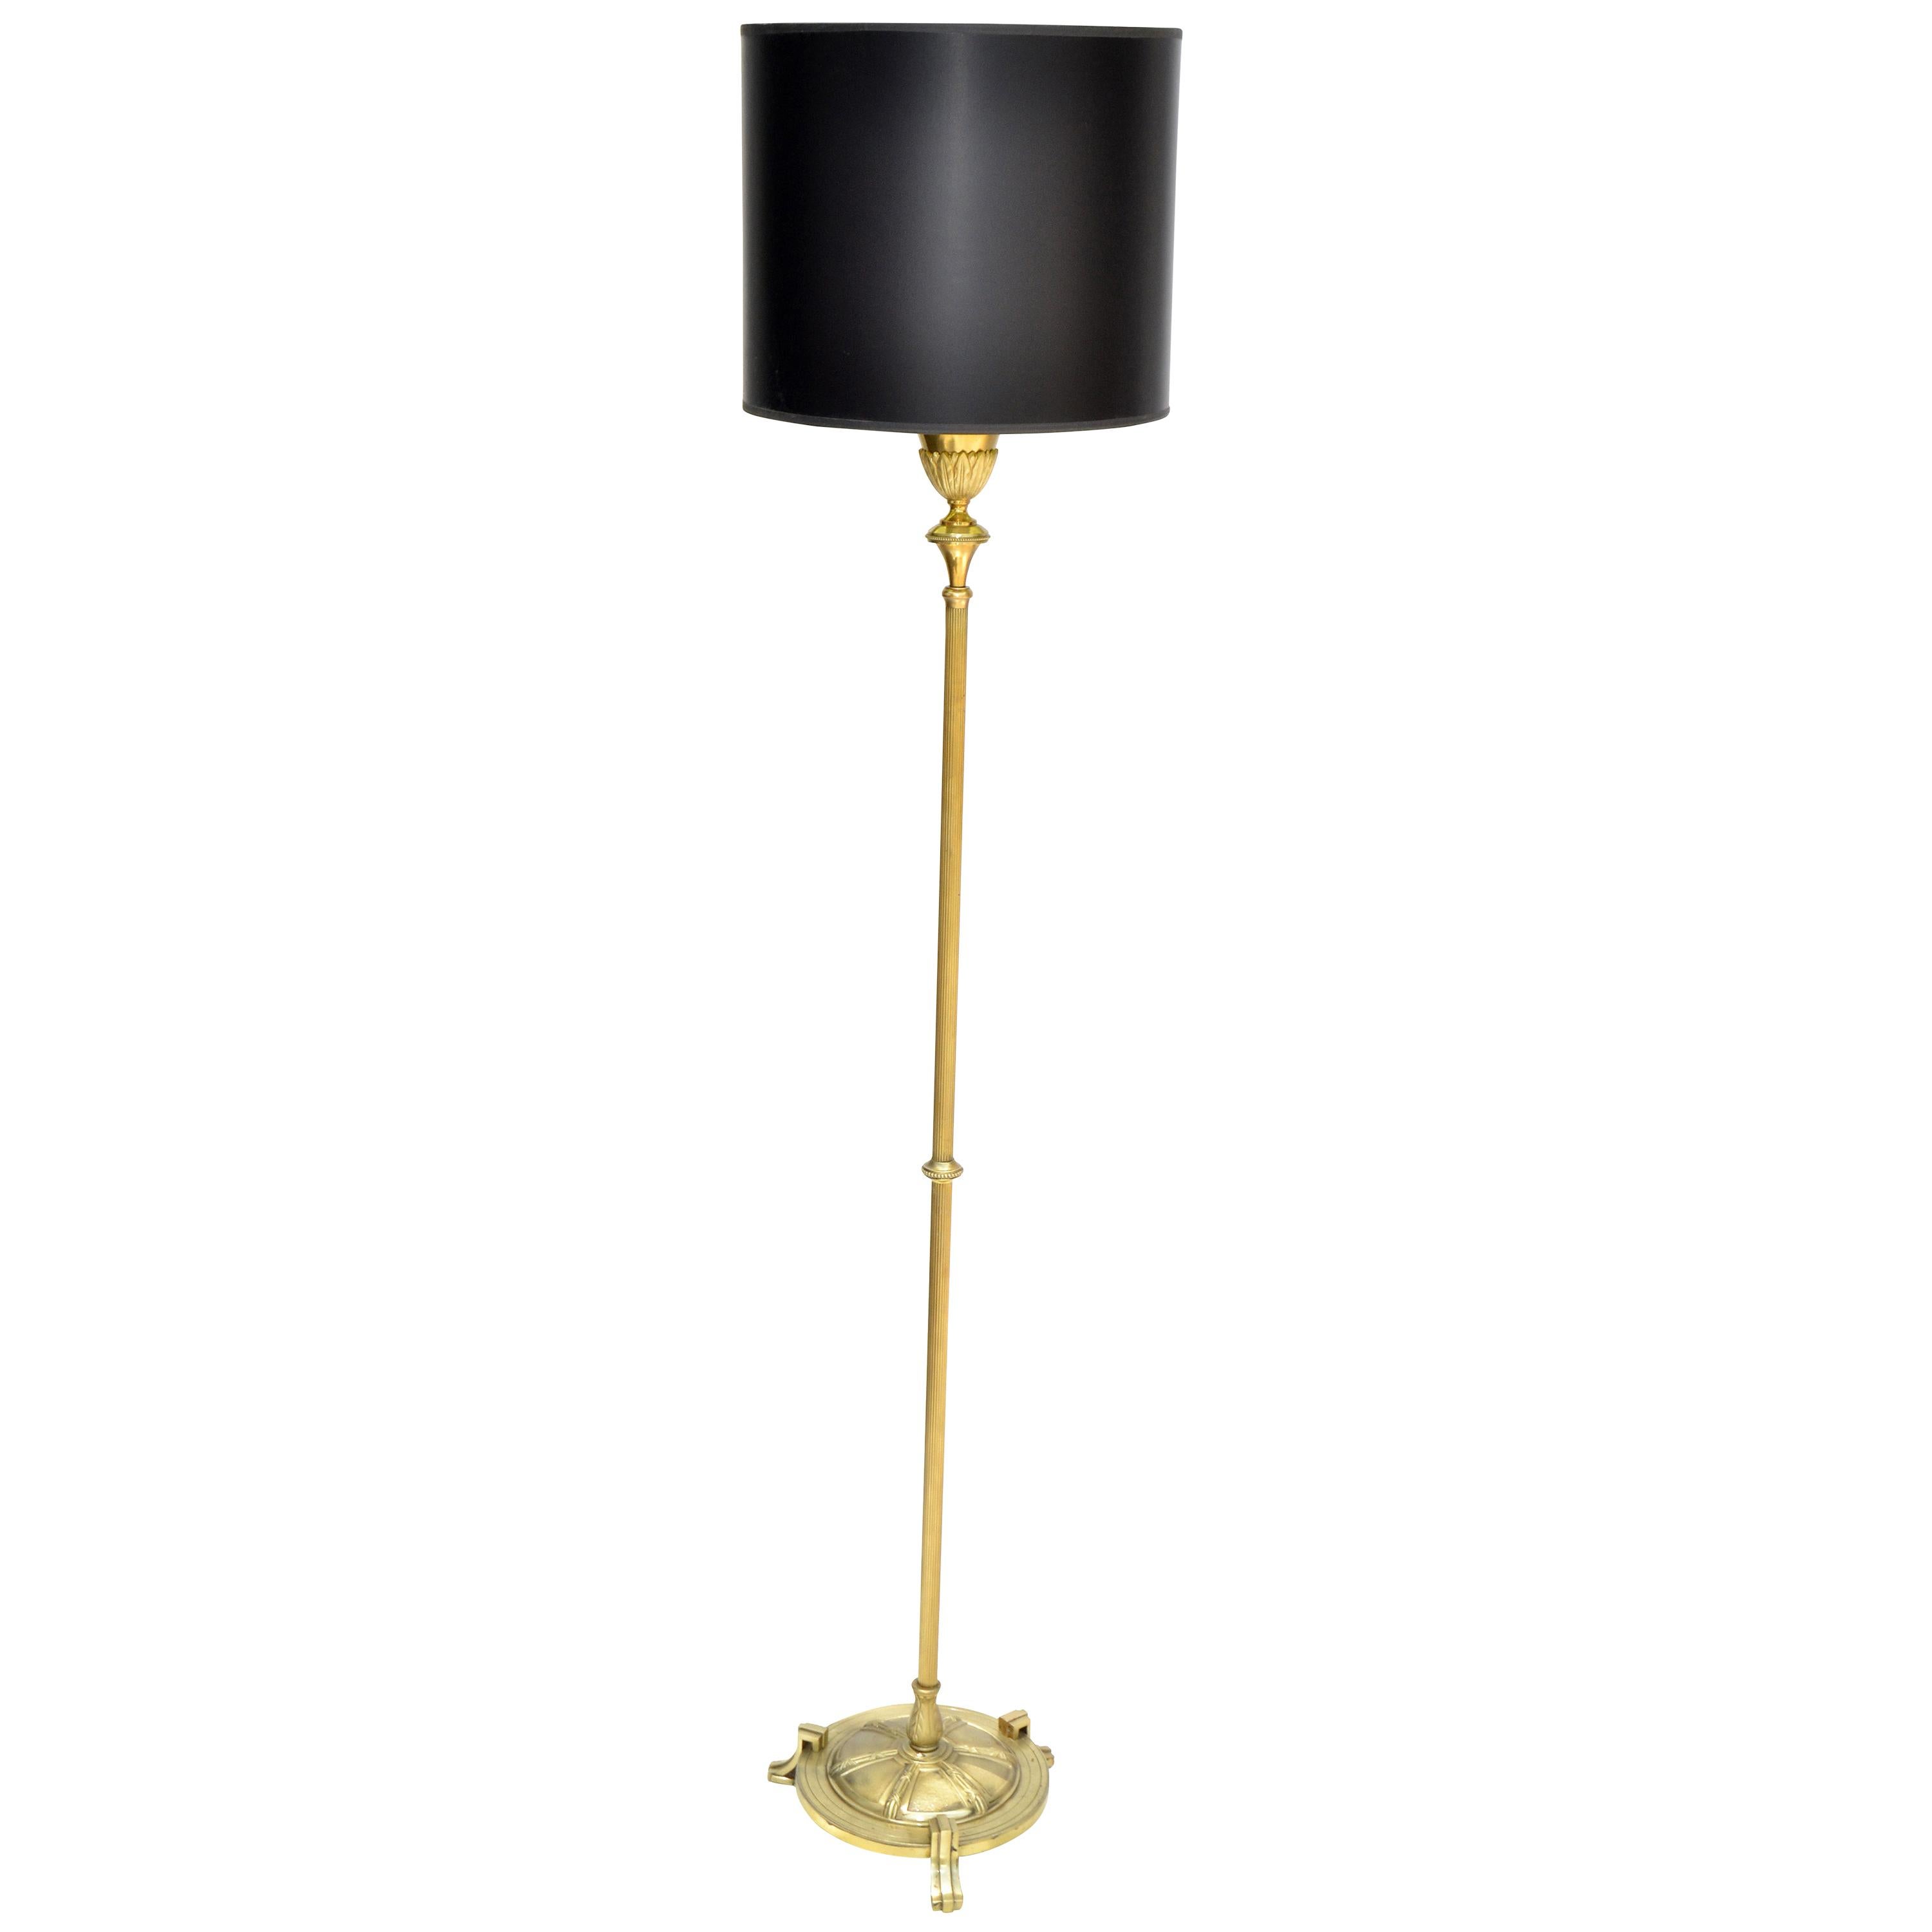 Maison Baguès French Neoclassical Bronze & Brass Round Base Floor Lamp, 1940s For Sale